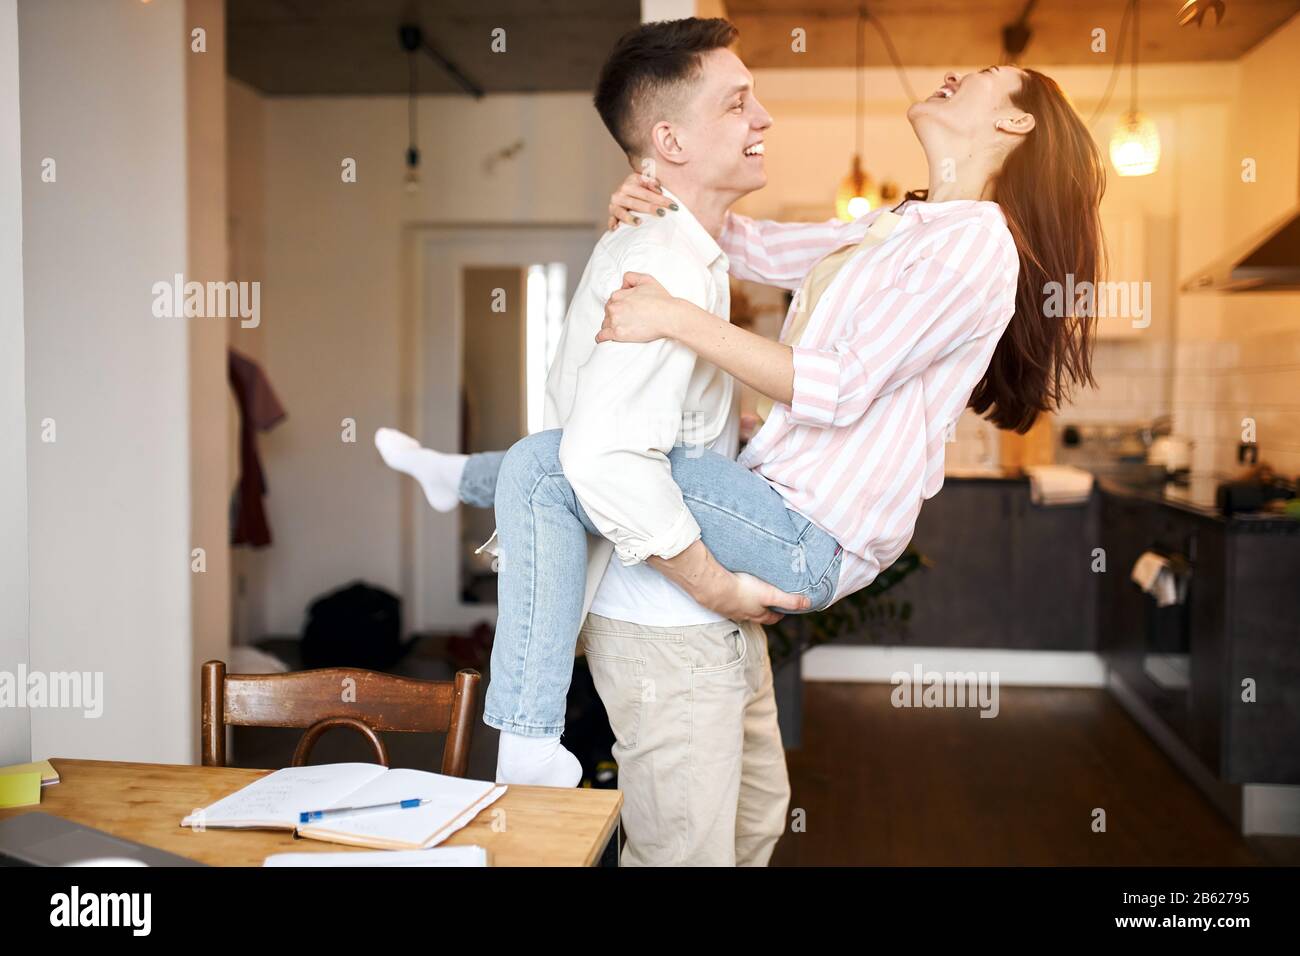 funny cheerful young people laughing, enjoying free time, close up side view photo. great time with family. happiness, positive feeling and emotion Stock Photo